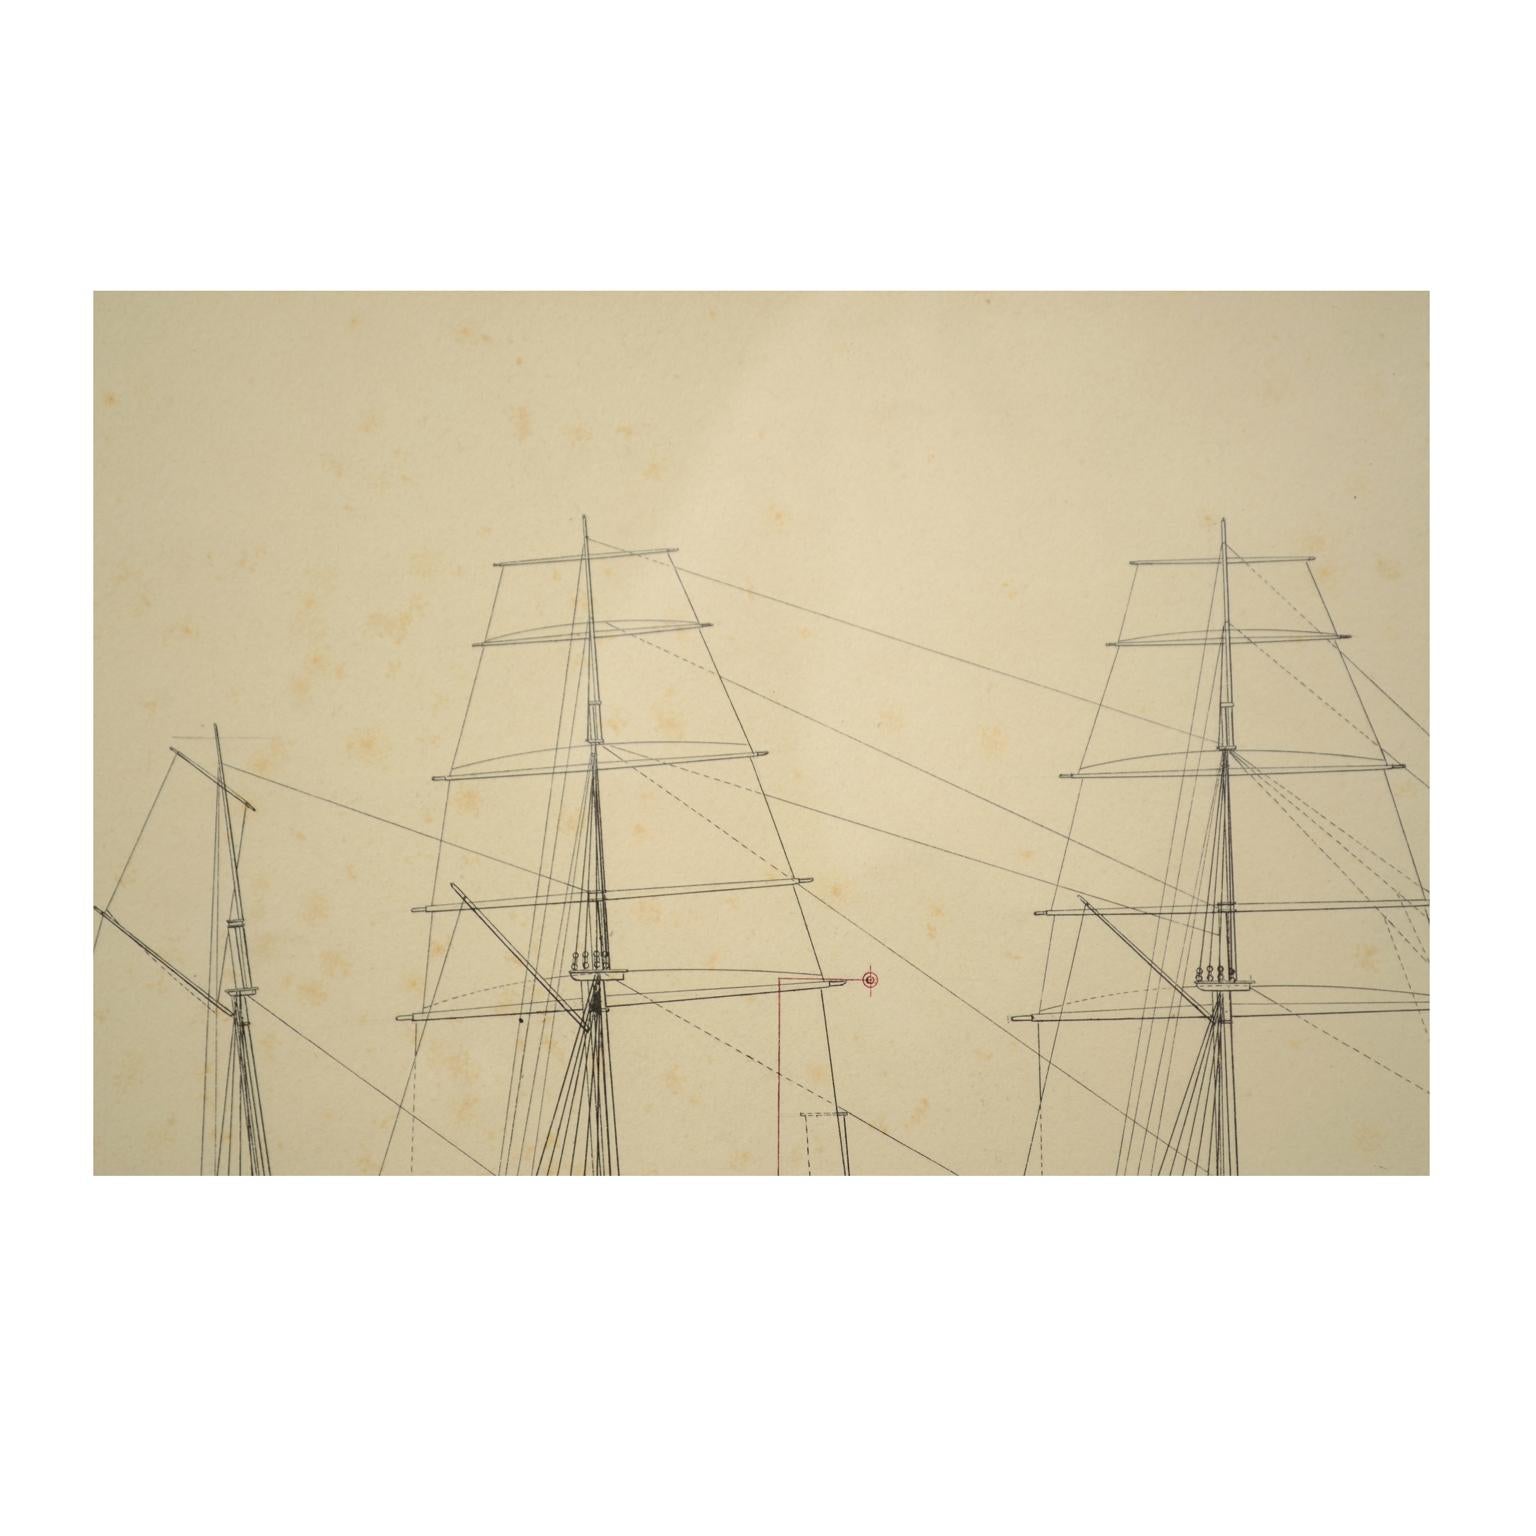 British Print no. 1 of 400 Depicting a Nautical Schooner Made in the Mid-19th Century For Sale